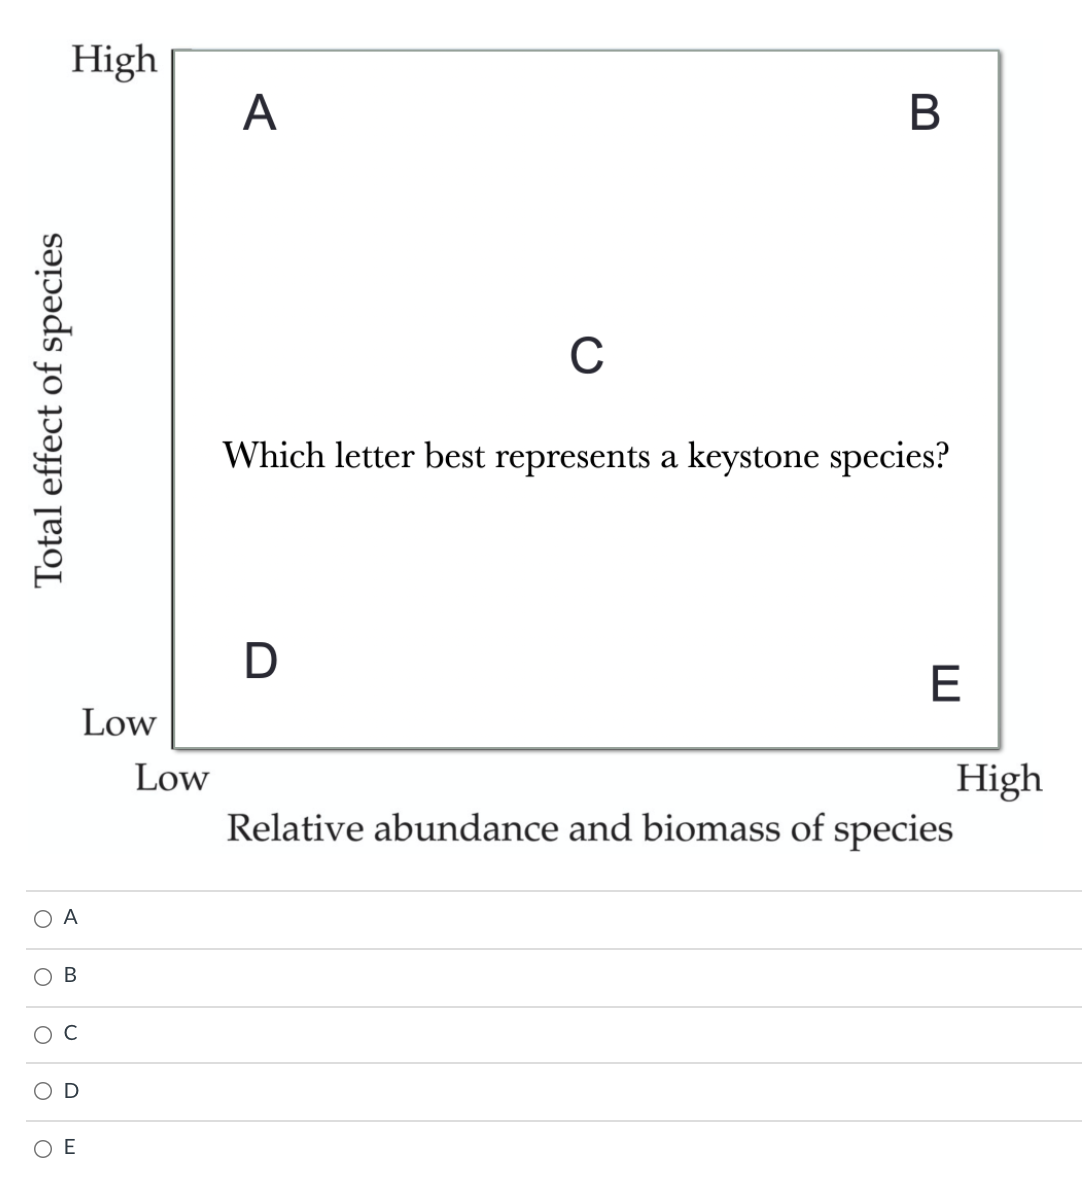 High
А
В
C
Which letter best represents a keystone species?
E
Low
High
Relative abundance and biomass of species
Low
O A
O D
O E
Total effect of species
B.
